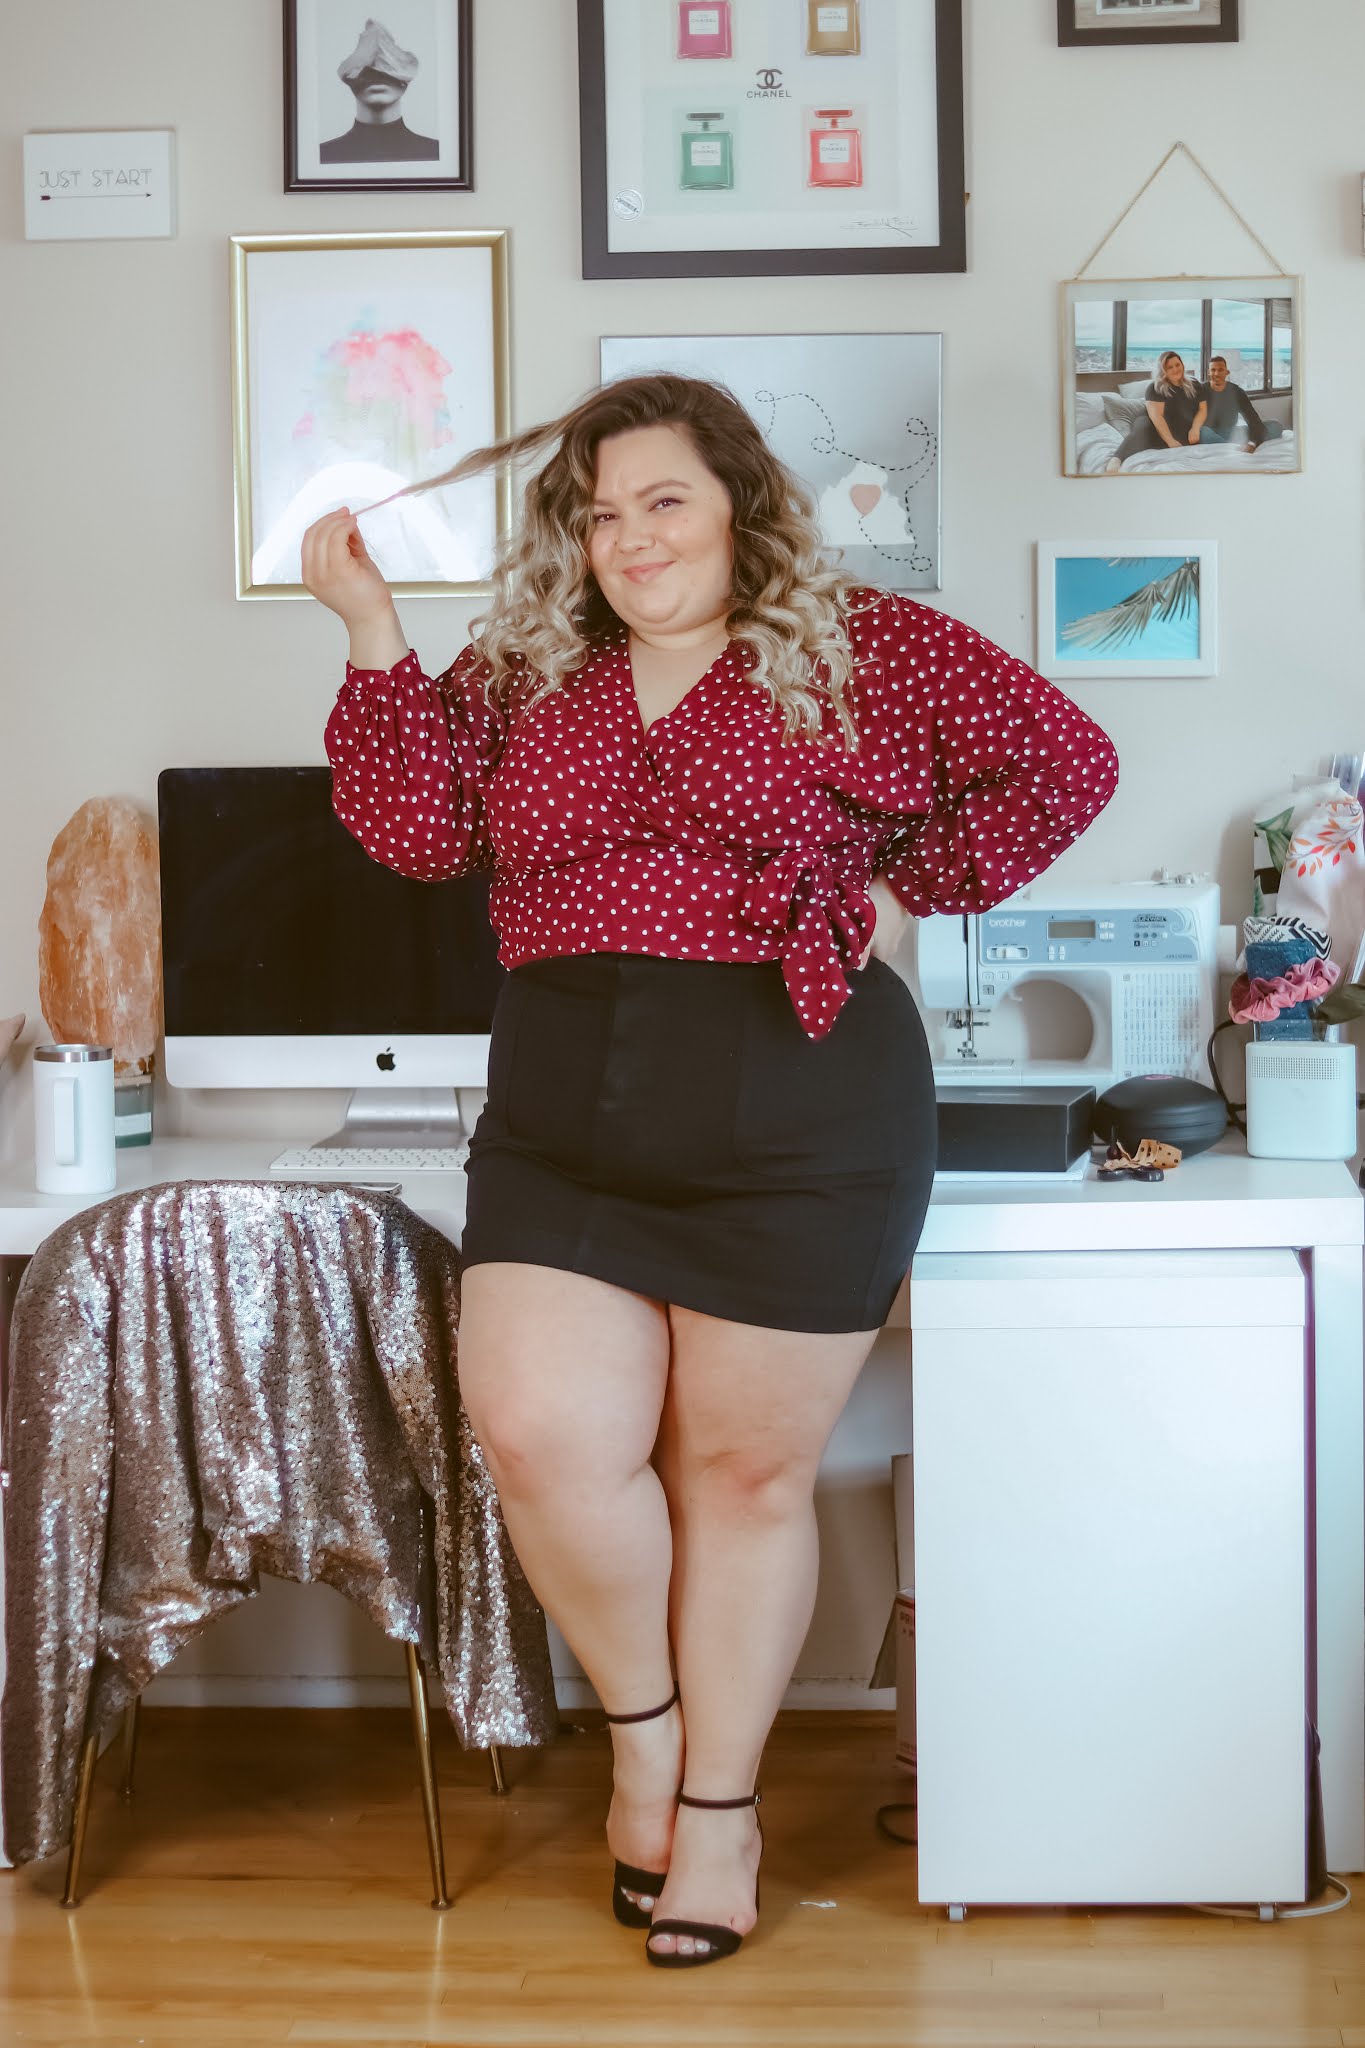 Chicago Plus Size Petite Fashion Blogger, influencer, YouTuber, and model Natalie Craig, of Natalie in the City, shares her latest work from home outfit.